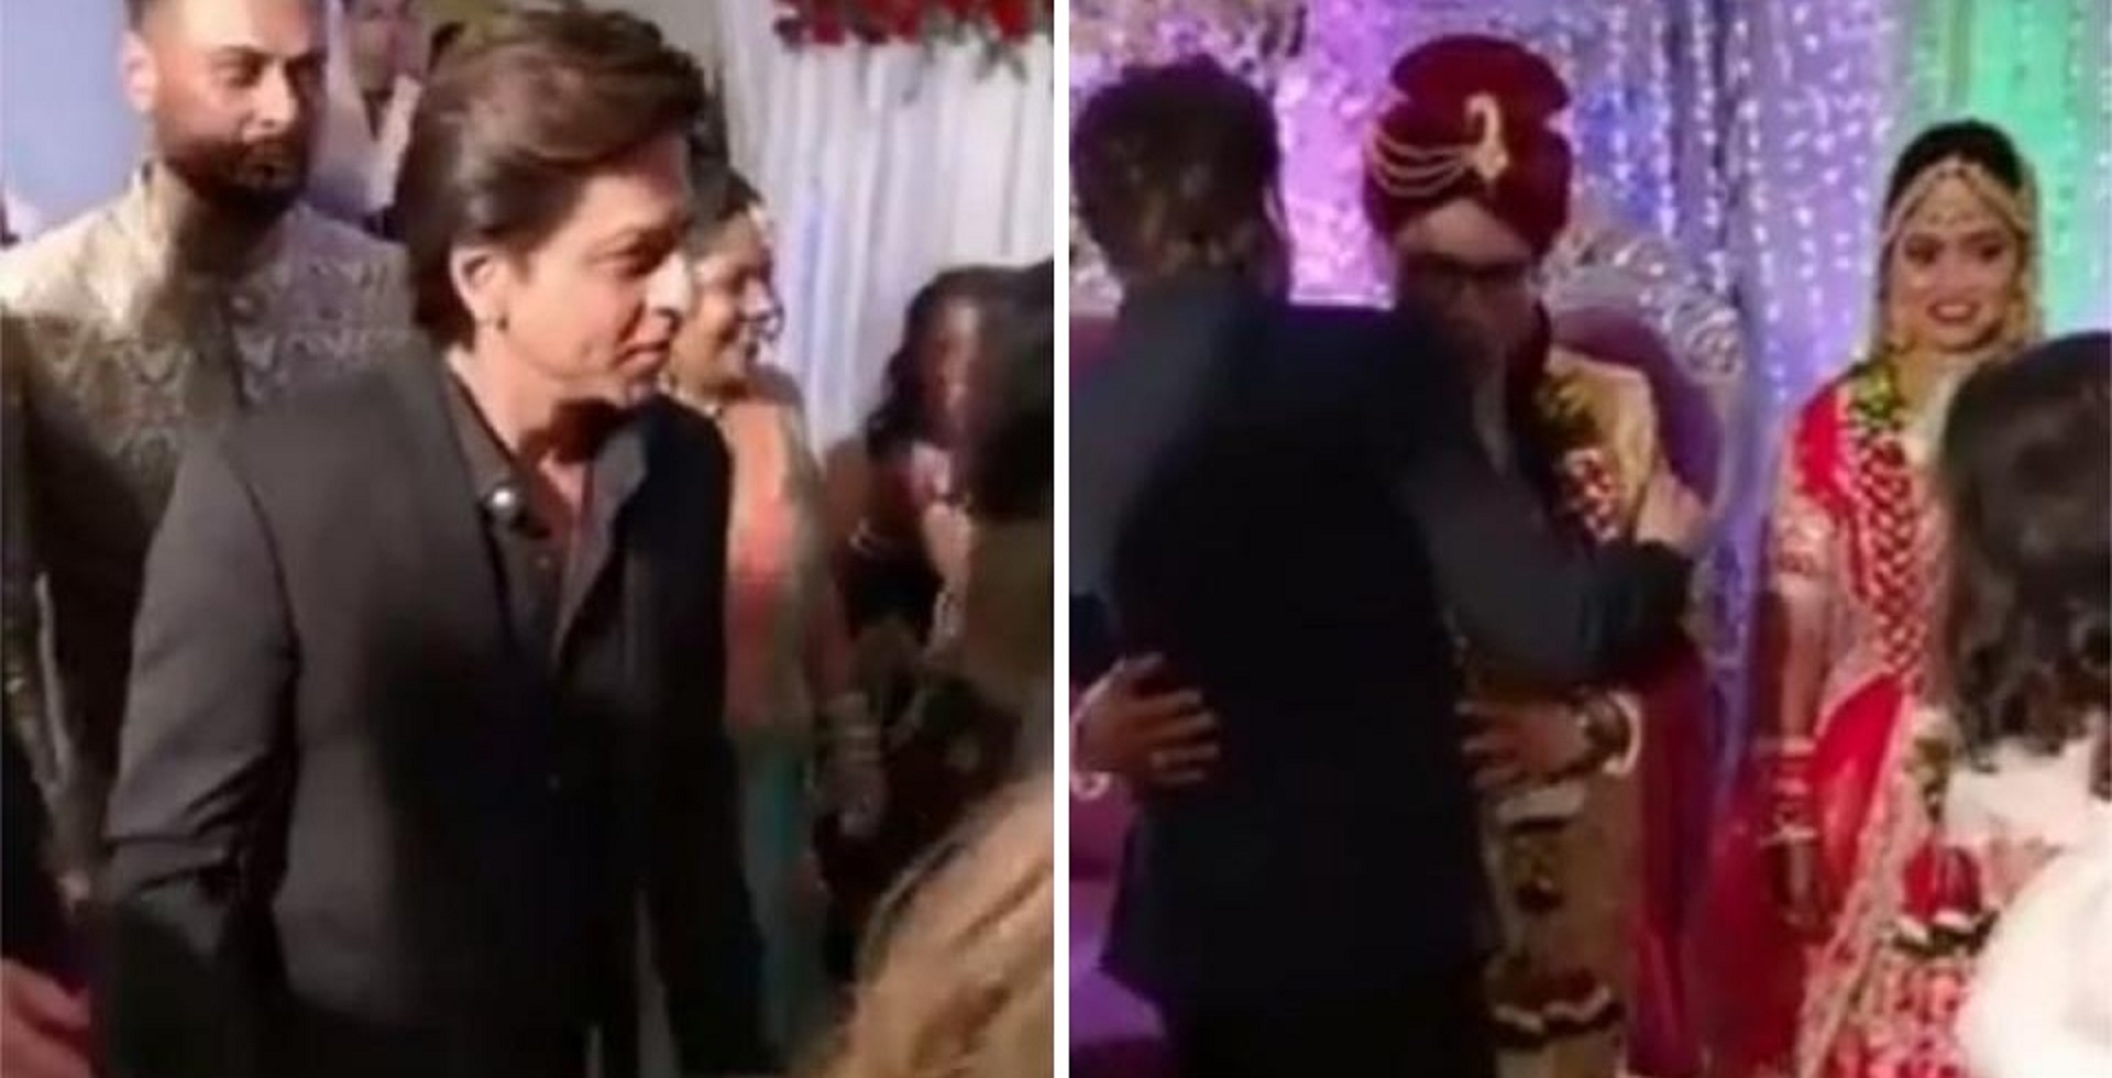 Shah Rukh Khan Attends Hairstylist’s Sister’s Wedding. Hugs & Congratulates the Couple. Watch video